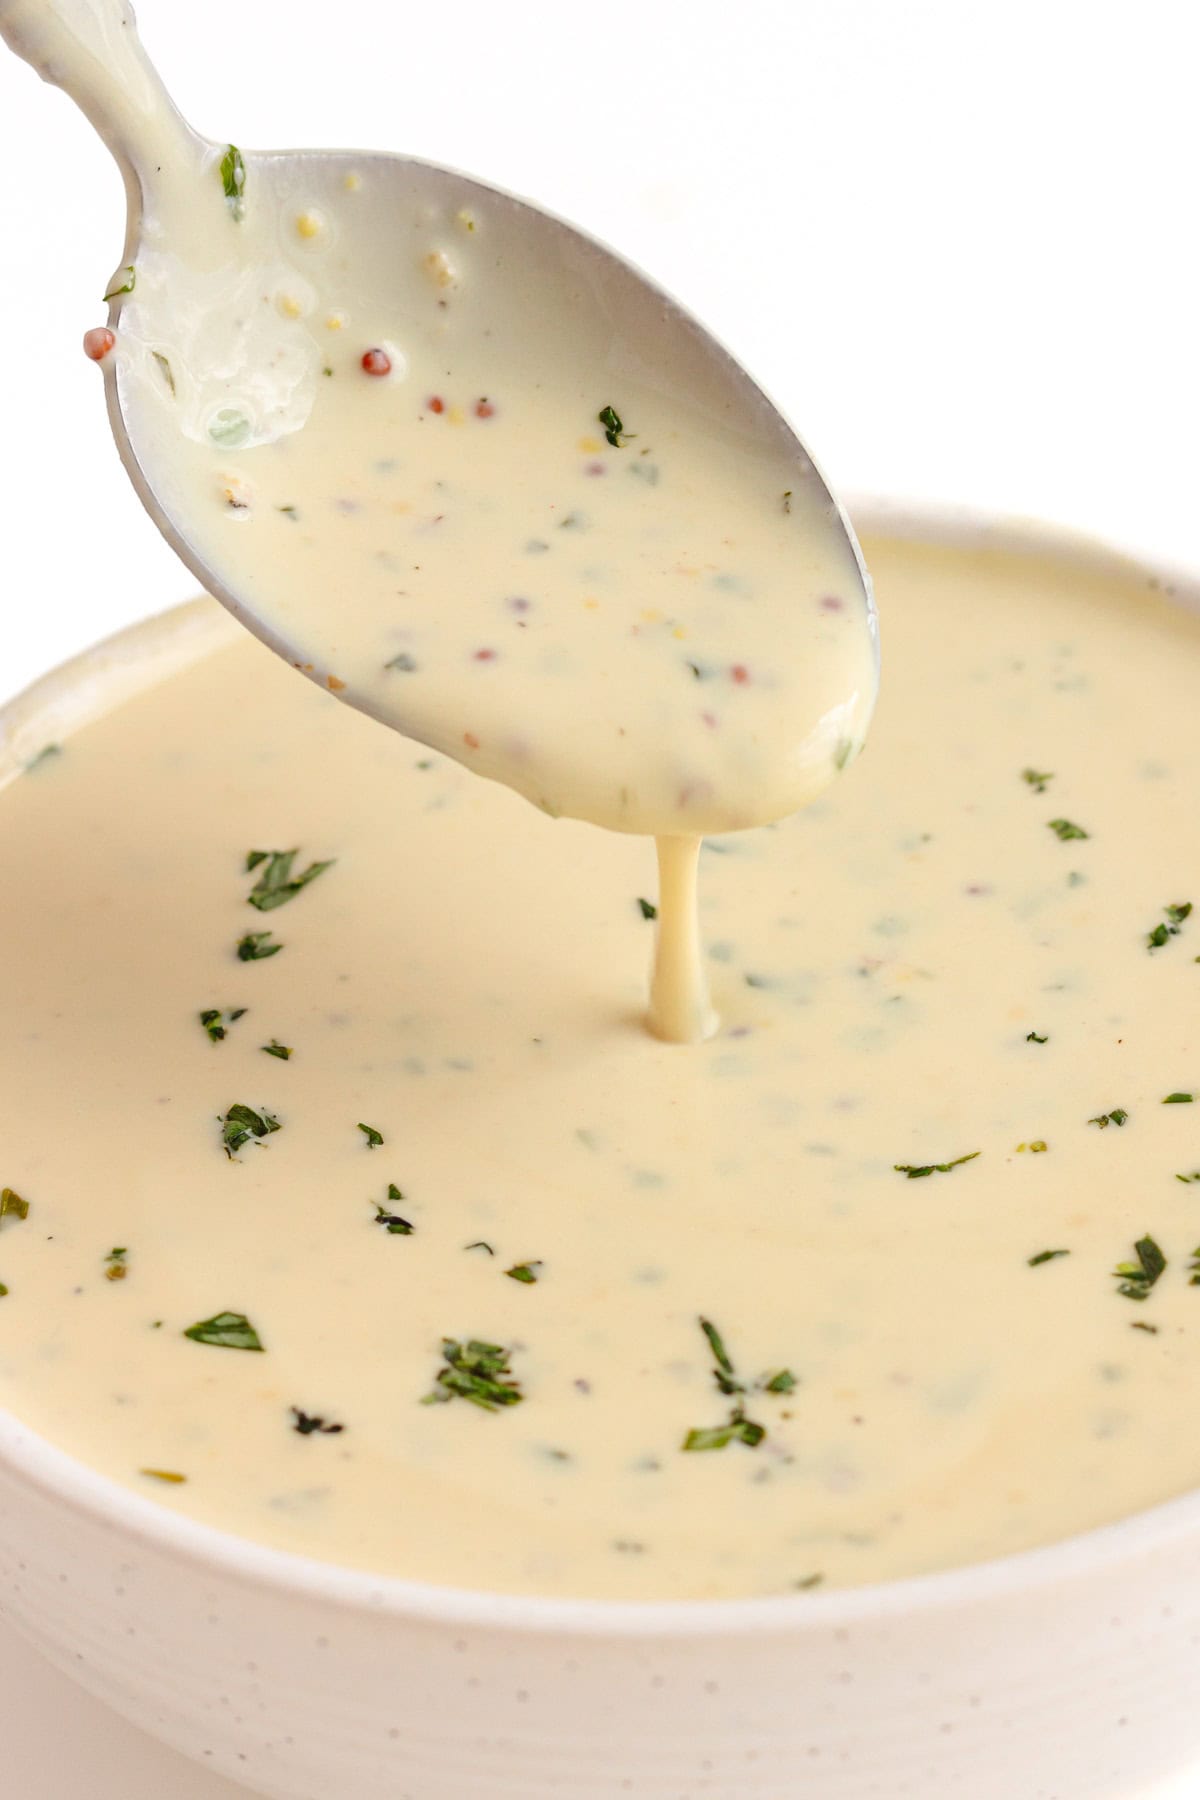 Spoon lifting mustard cream sauce from a small bowl.